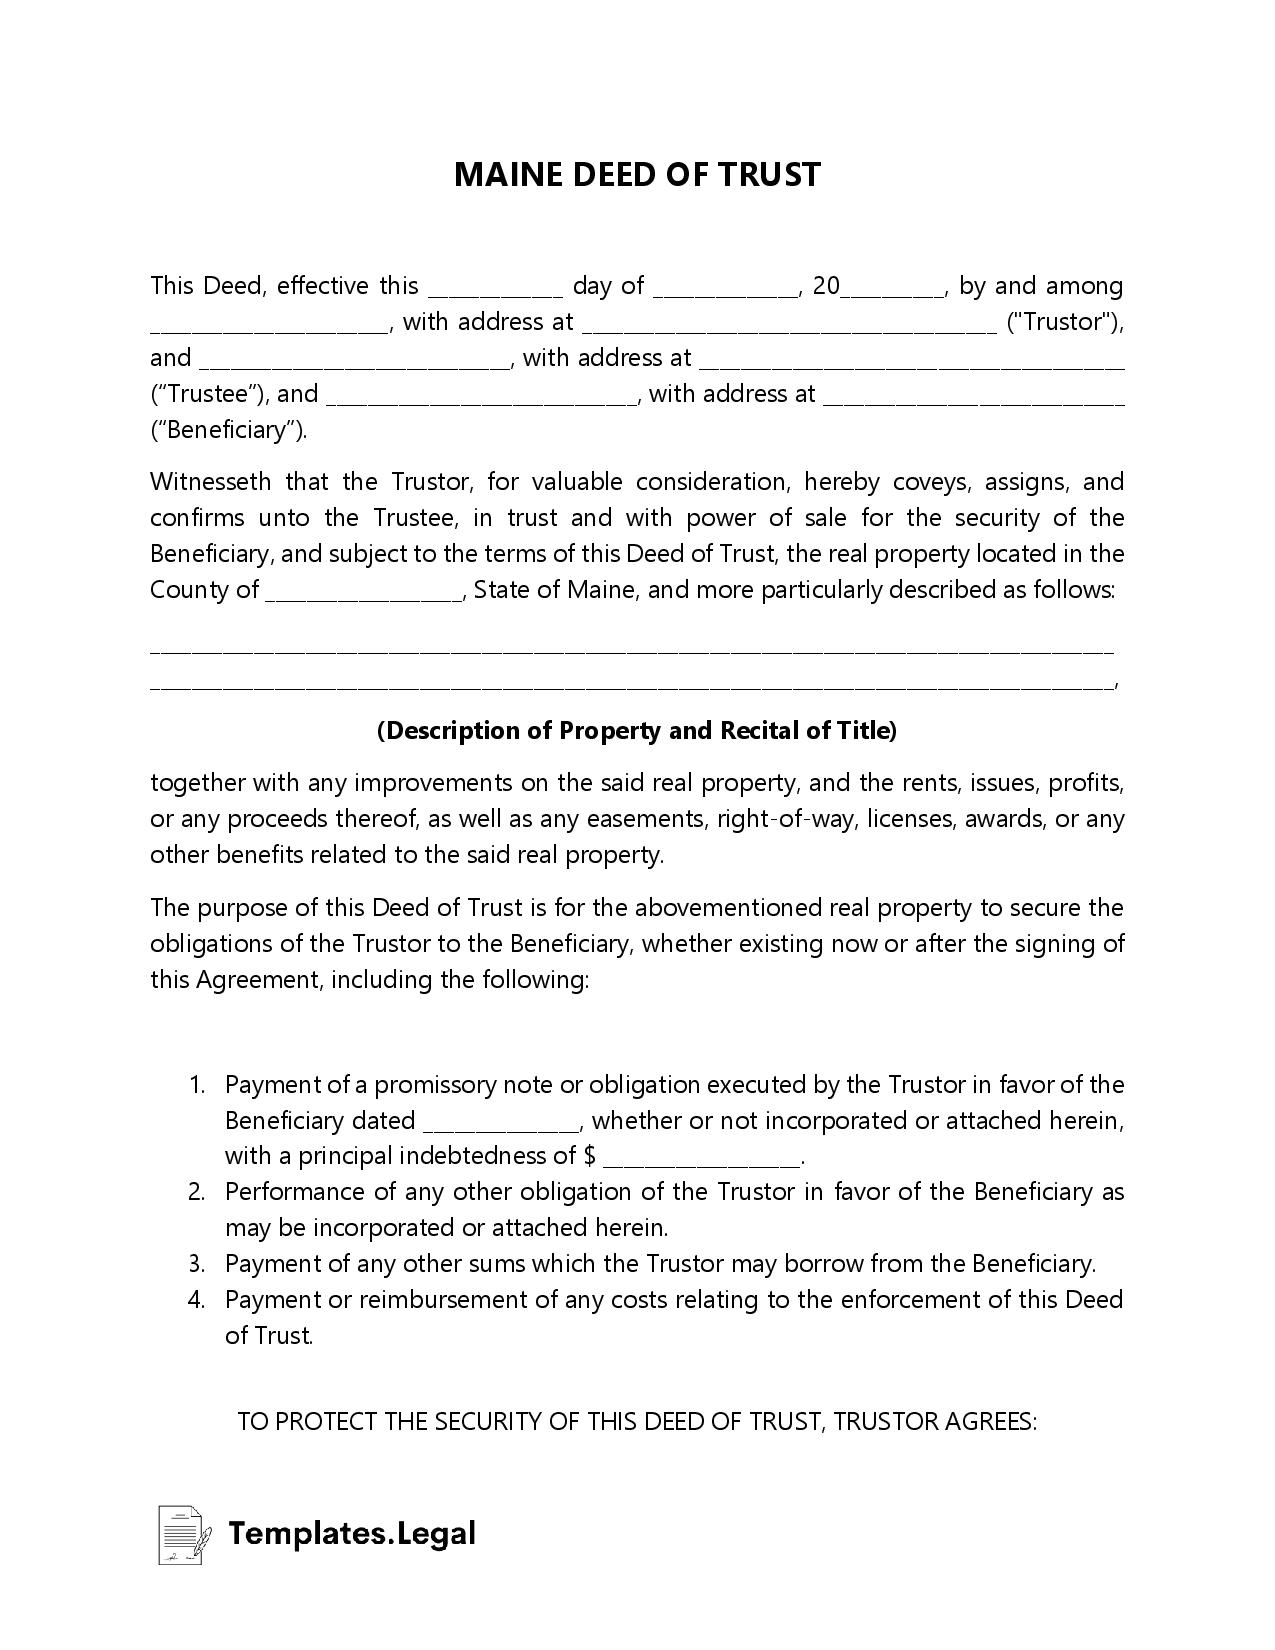 Maine Deed of Trust - Templates.Legal